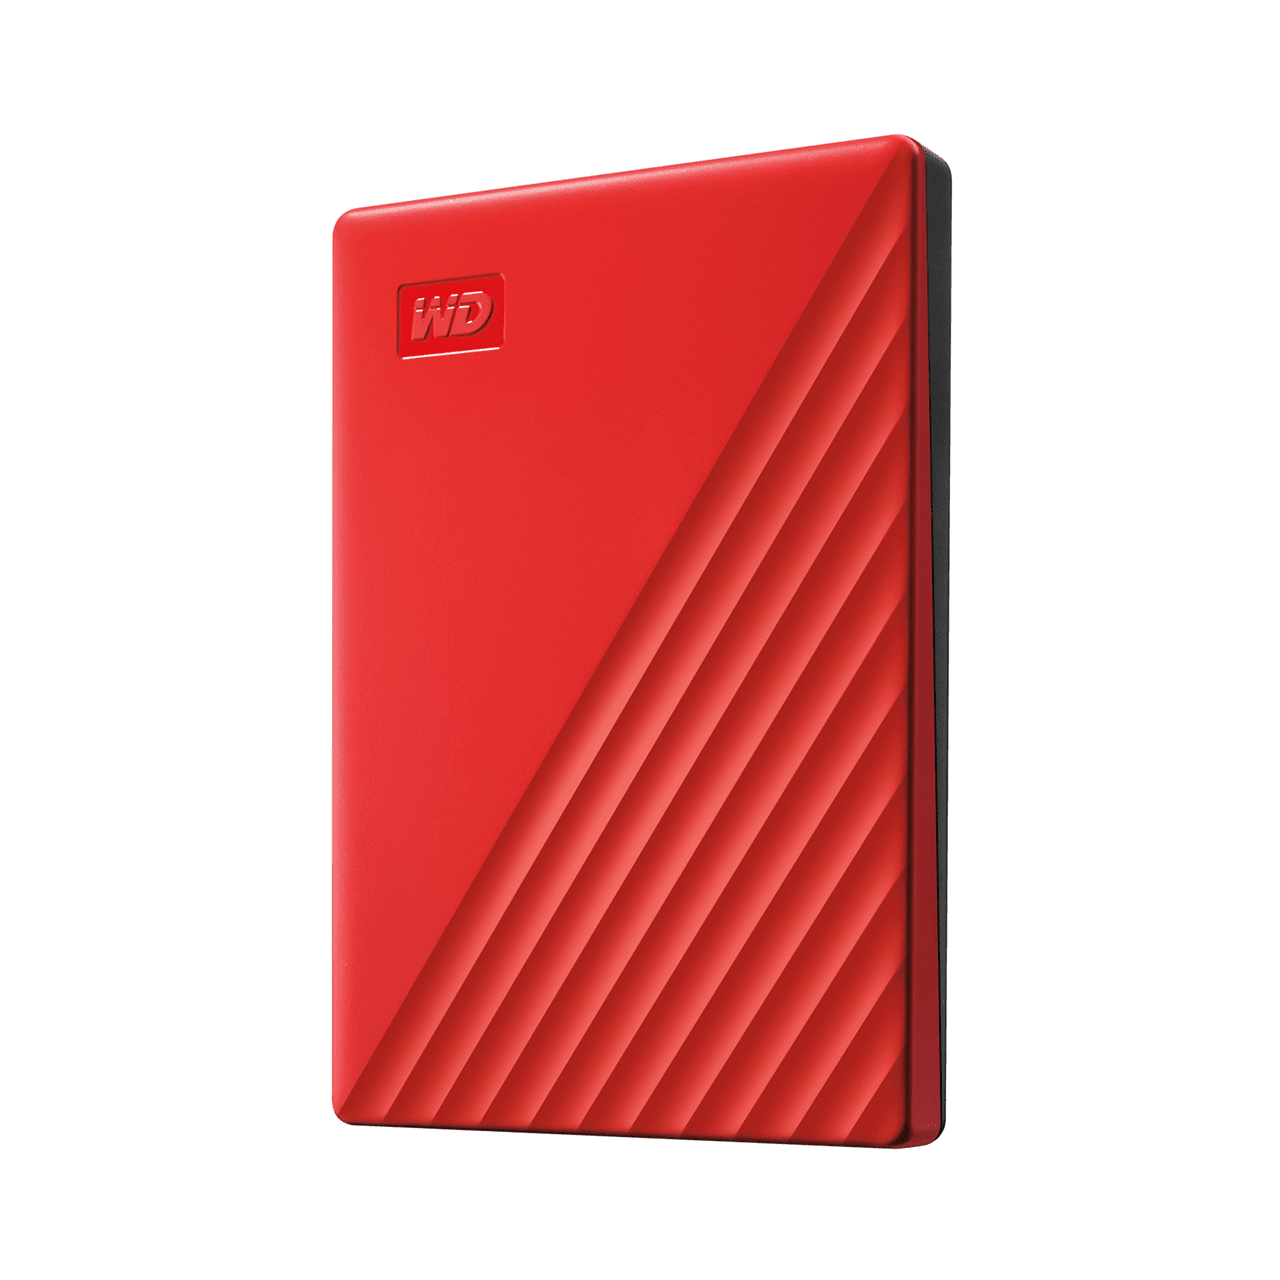 WD Western Digital My Passport 4TB (Red)  Slim Portable External Hard Disk USB 3.0 With WD Backup Software & Password Protection